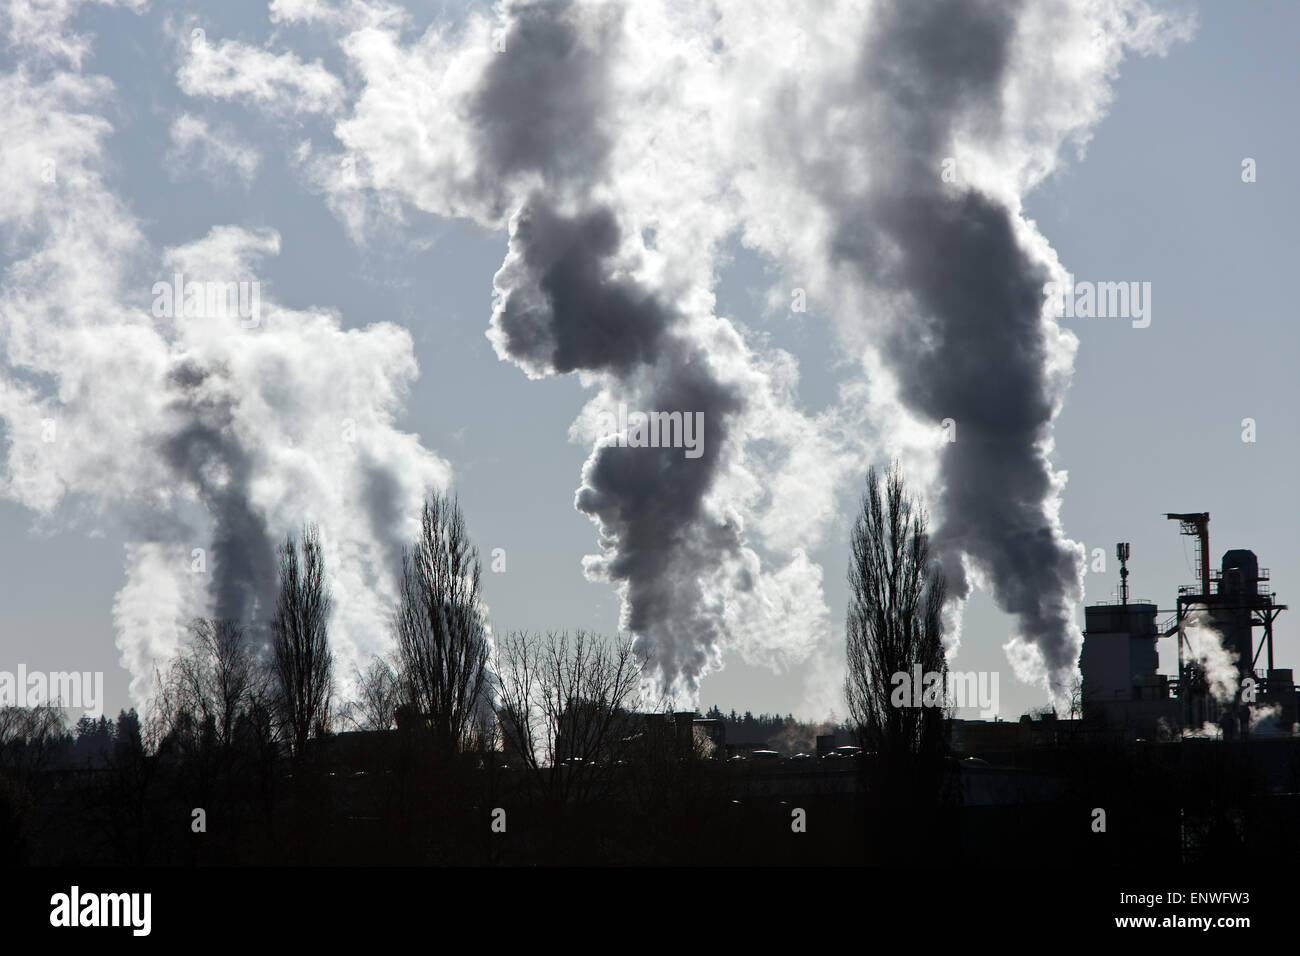 Environmental pollution by industrial emissions Stock Photo